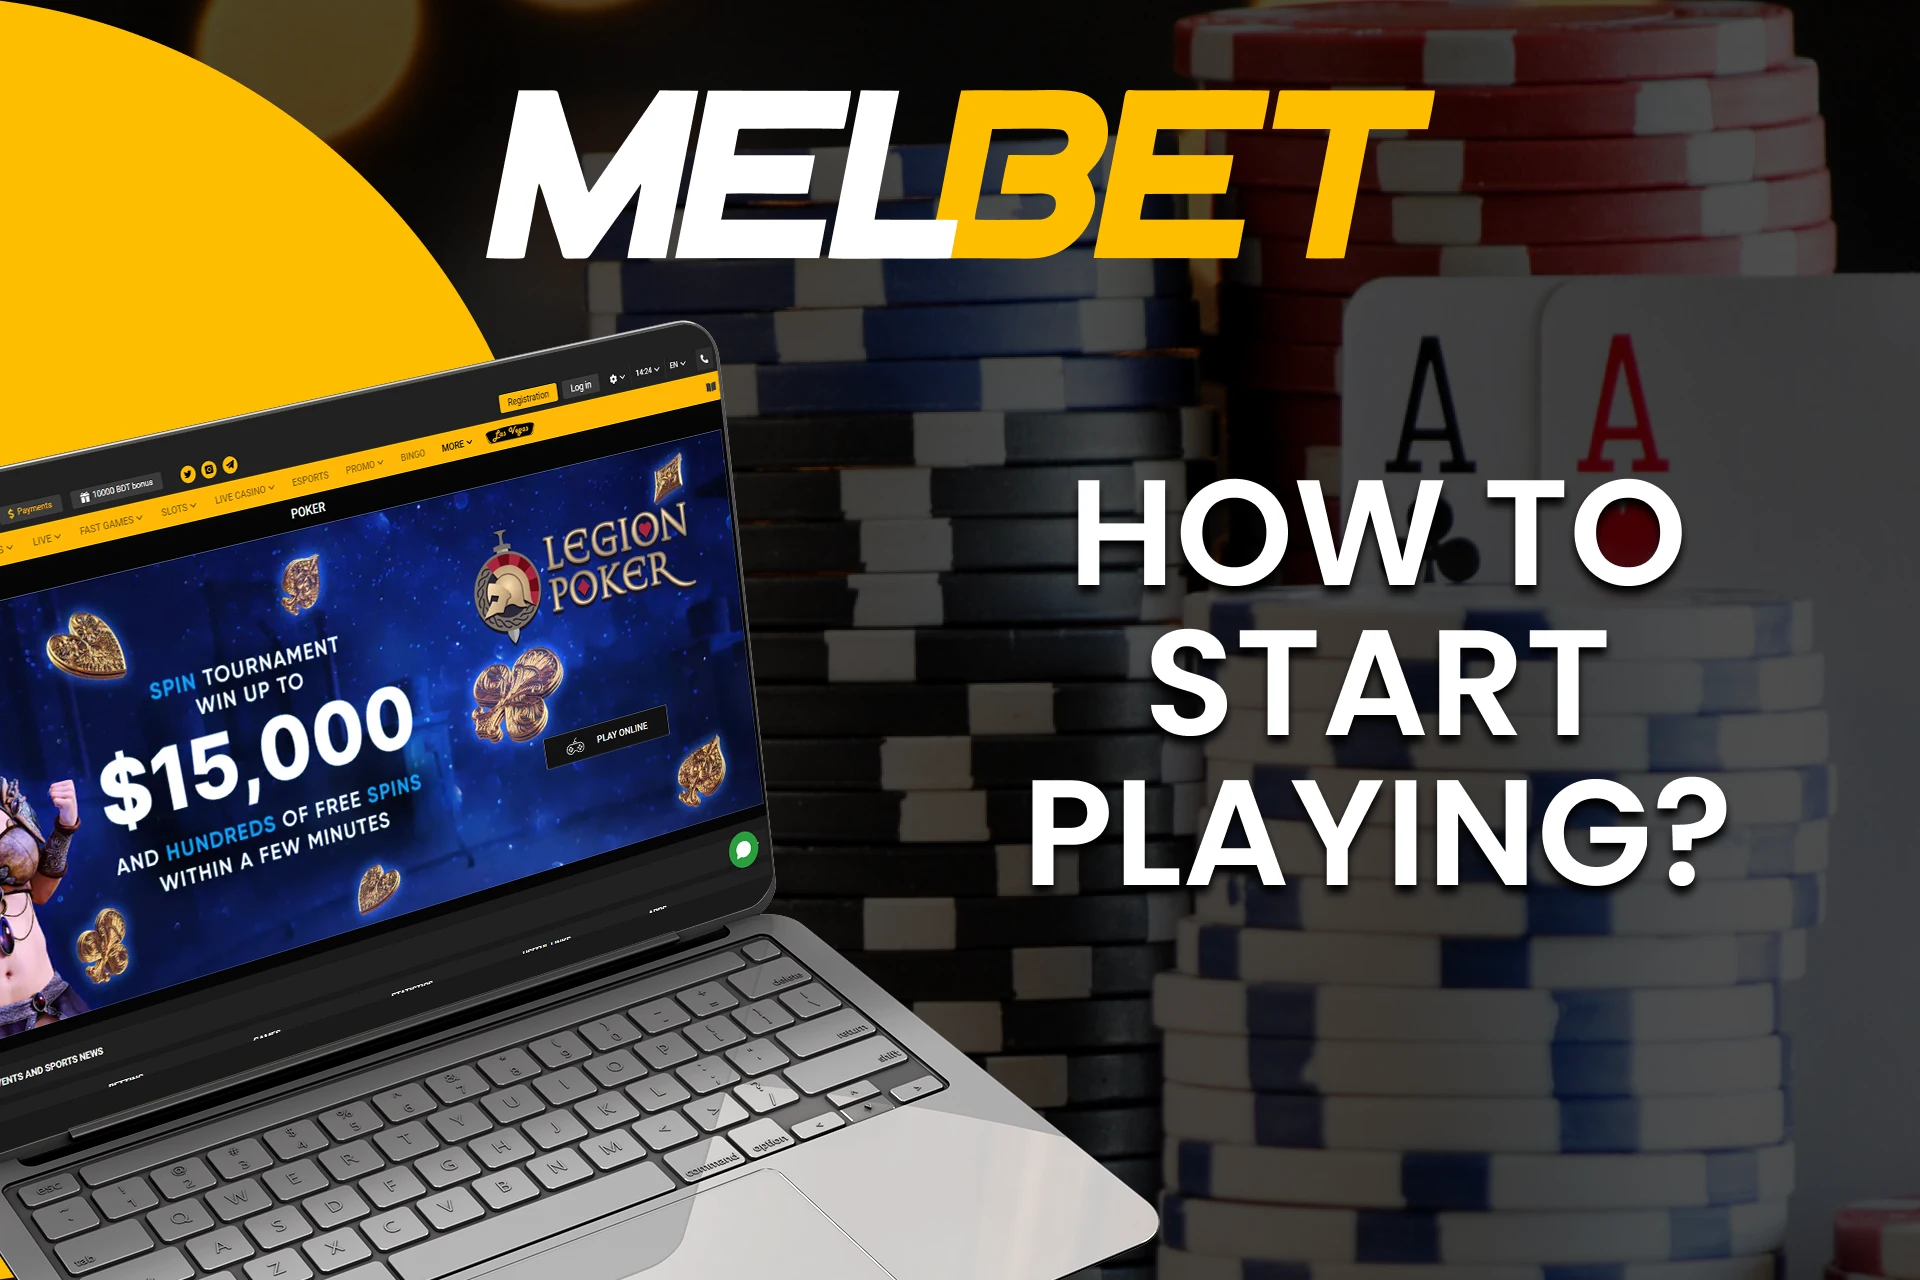 Select the desired section on Melbet to play Poker.